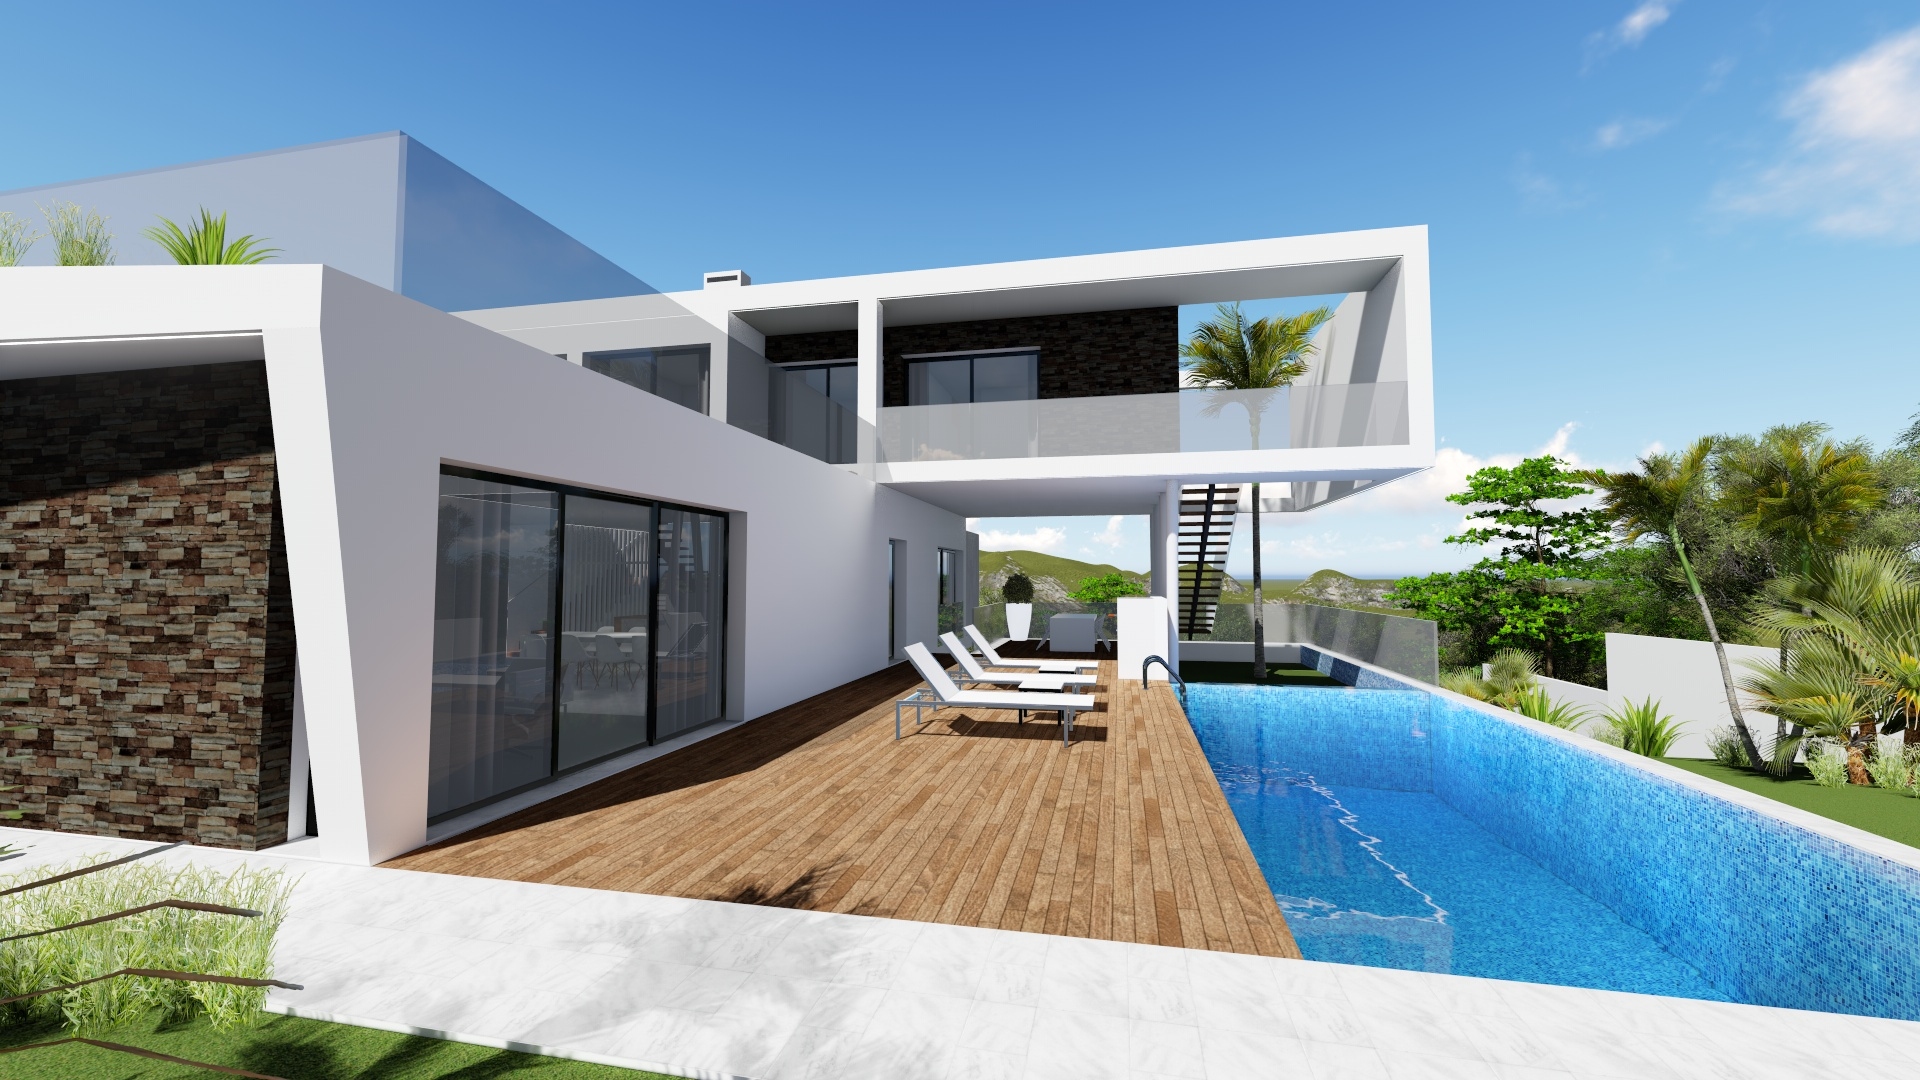 CONSTRUCTION STARTING SOON - Modern 4 Bedroom Villa and Pool with Panoramic Views in Vale Judeu | VM2147 4-bedroom Villa with a pool and top quality finishings to start construction September 2023. Good investment opportunity.